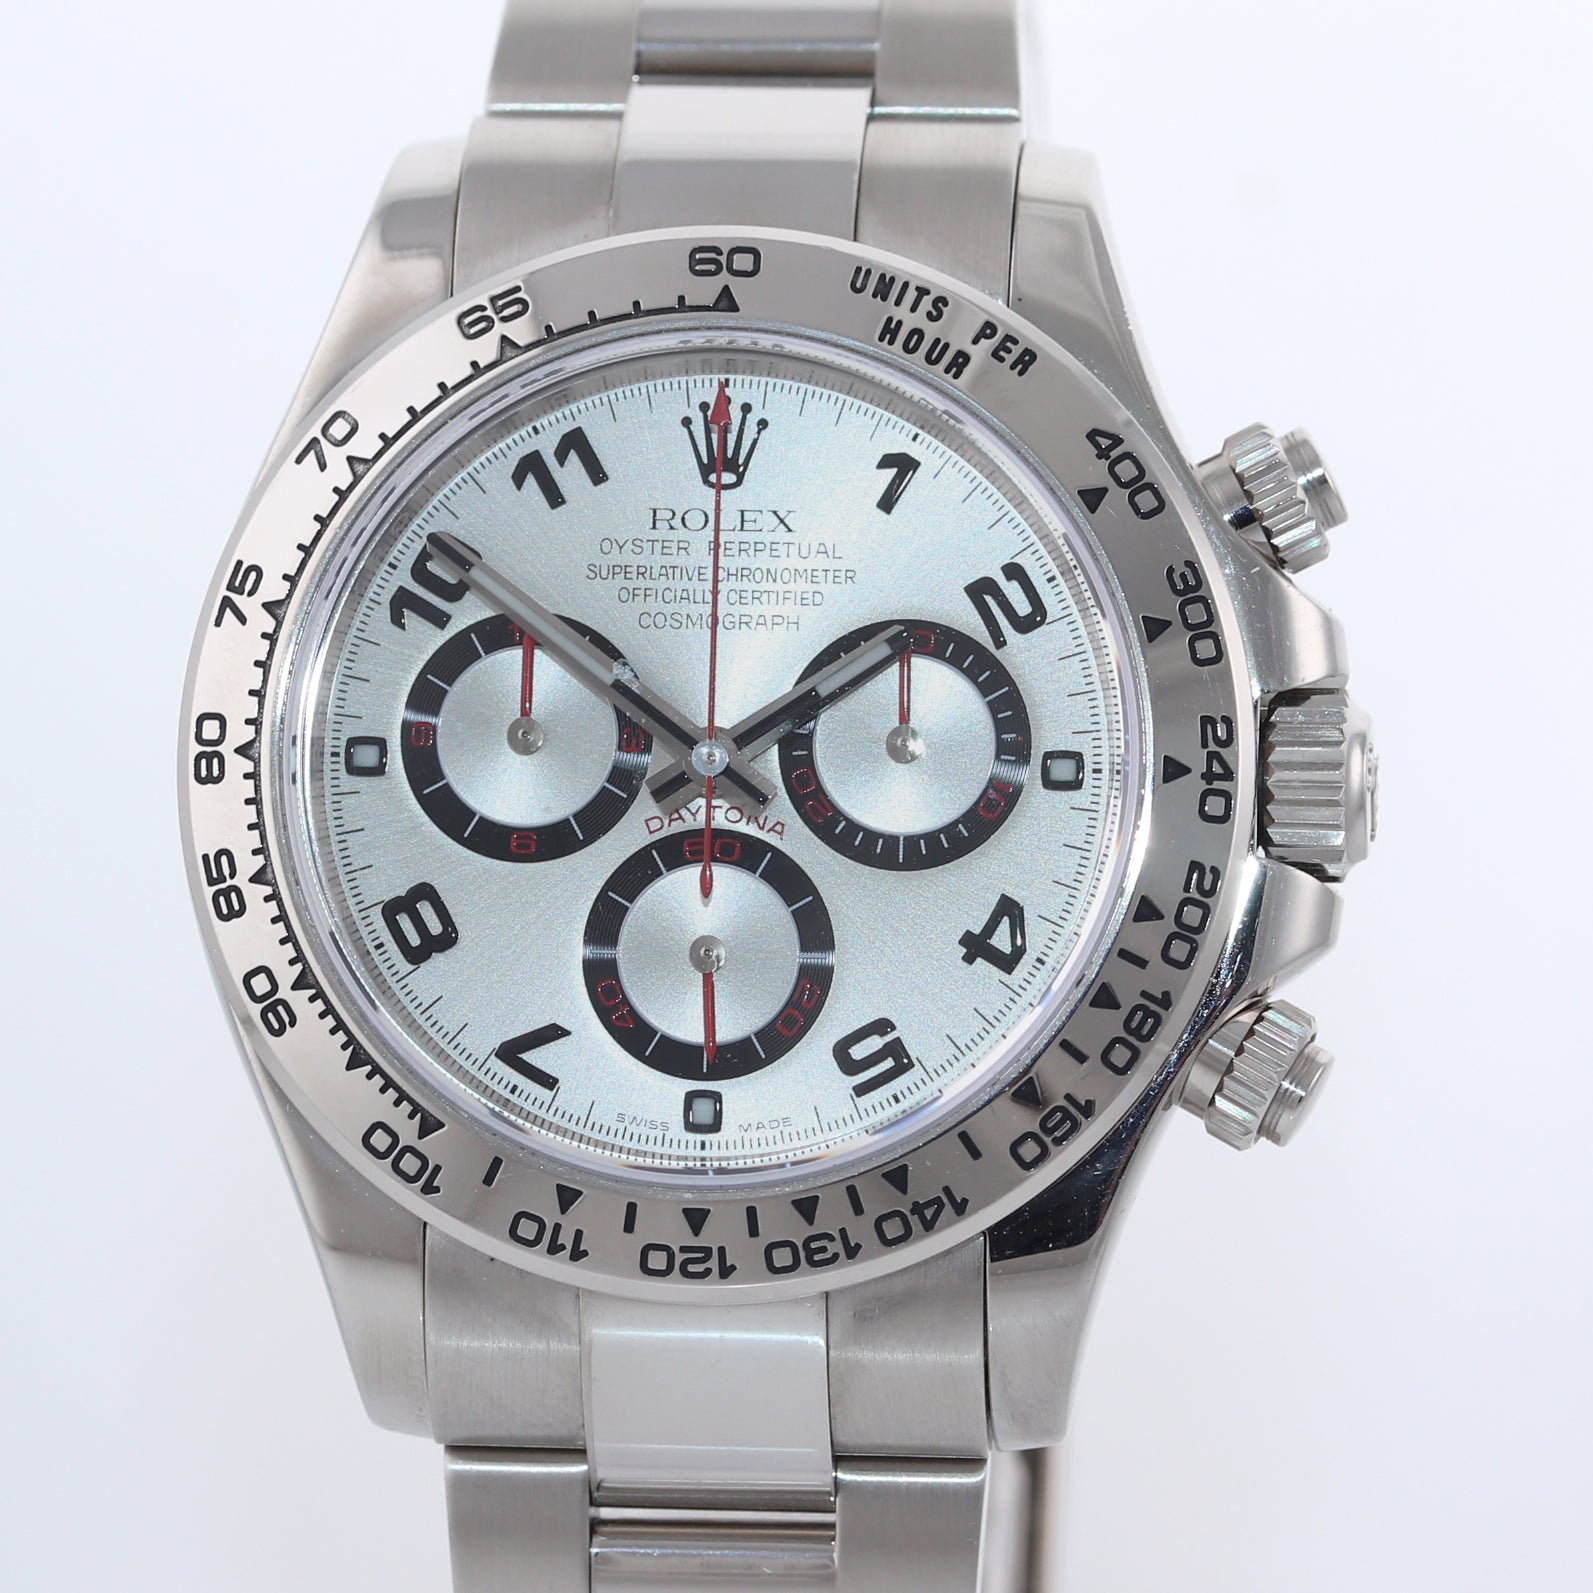 2015 PAPERS Rolex Daytona Silver Dial 116509 18k White Gold NEW BUCKLE Watch Box